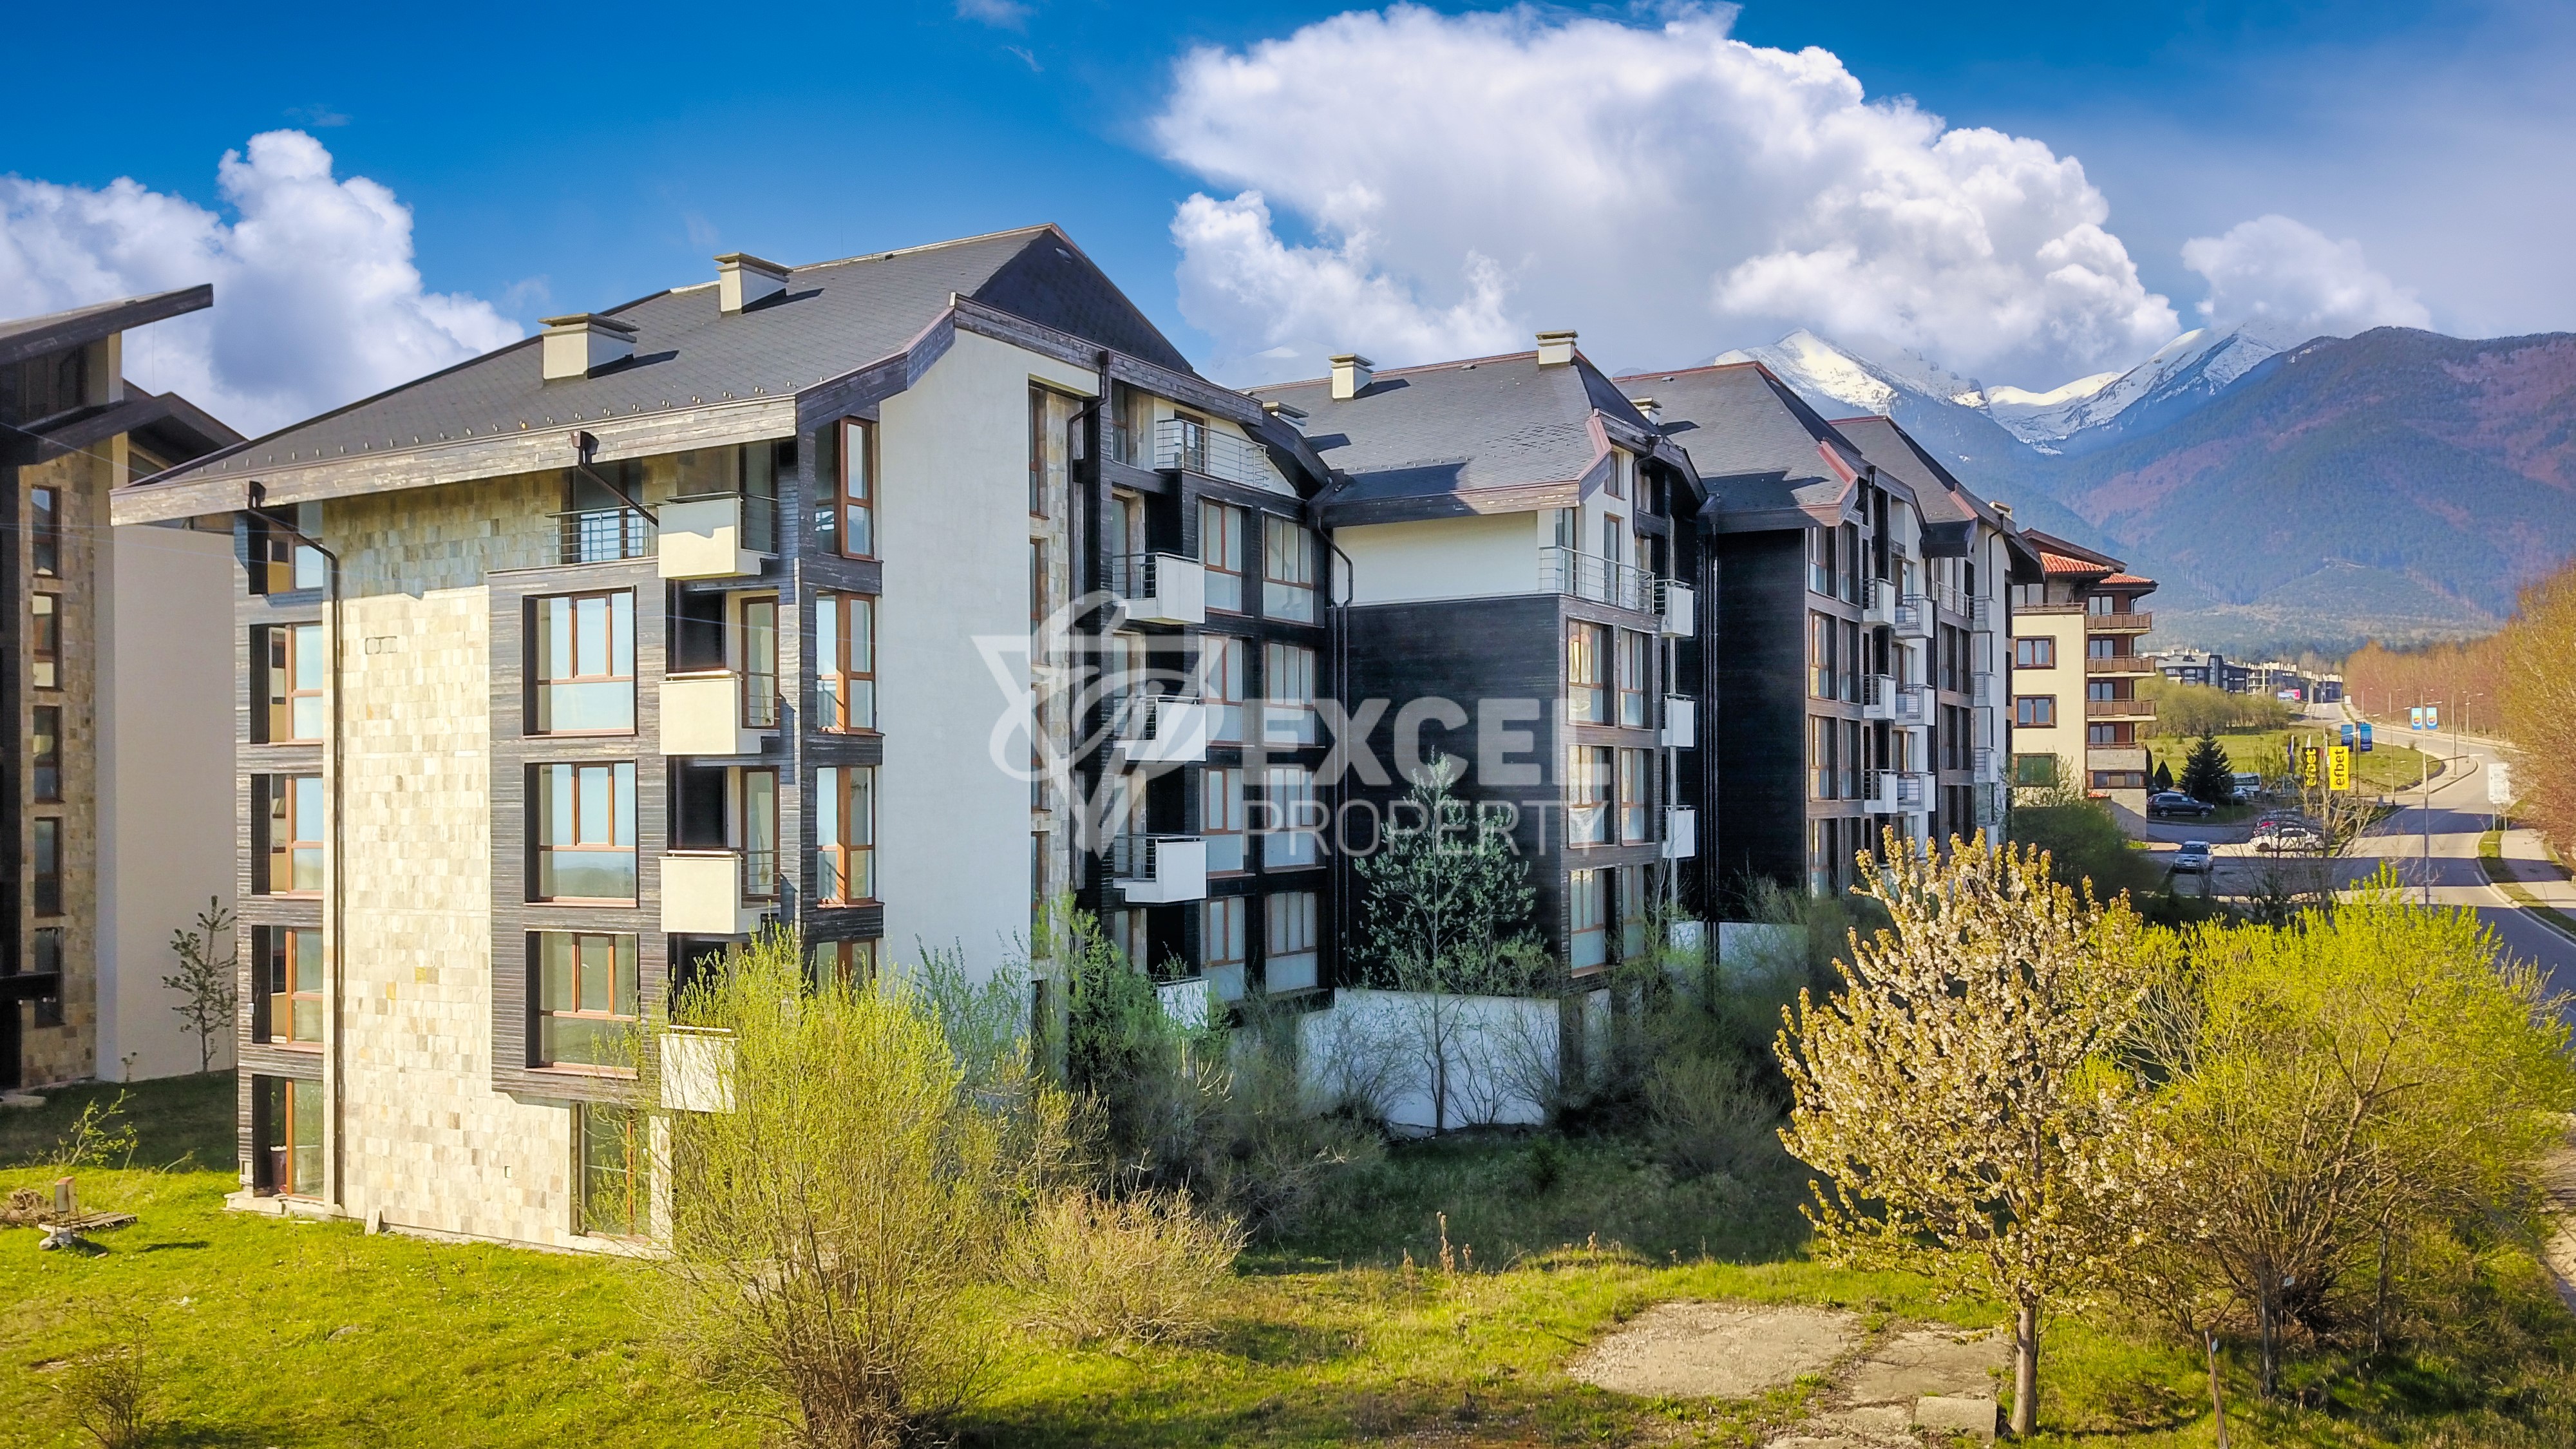 One-bedroom apartment for sale in a new residential complex ”Silver Mountain”, next to Pirin Golf